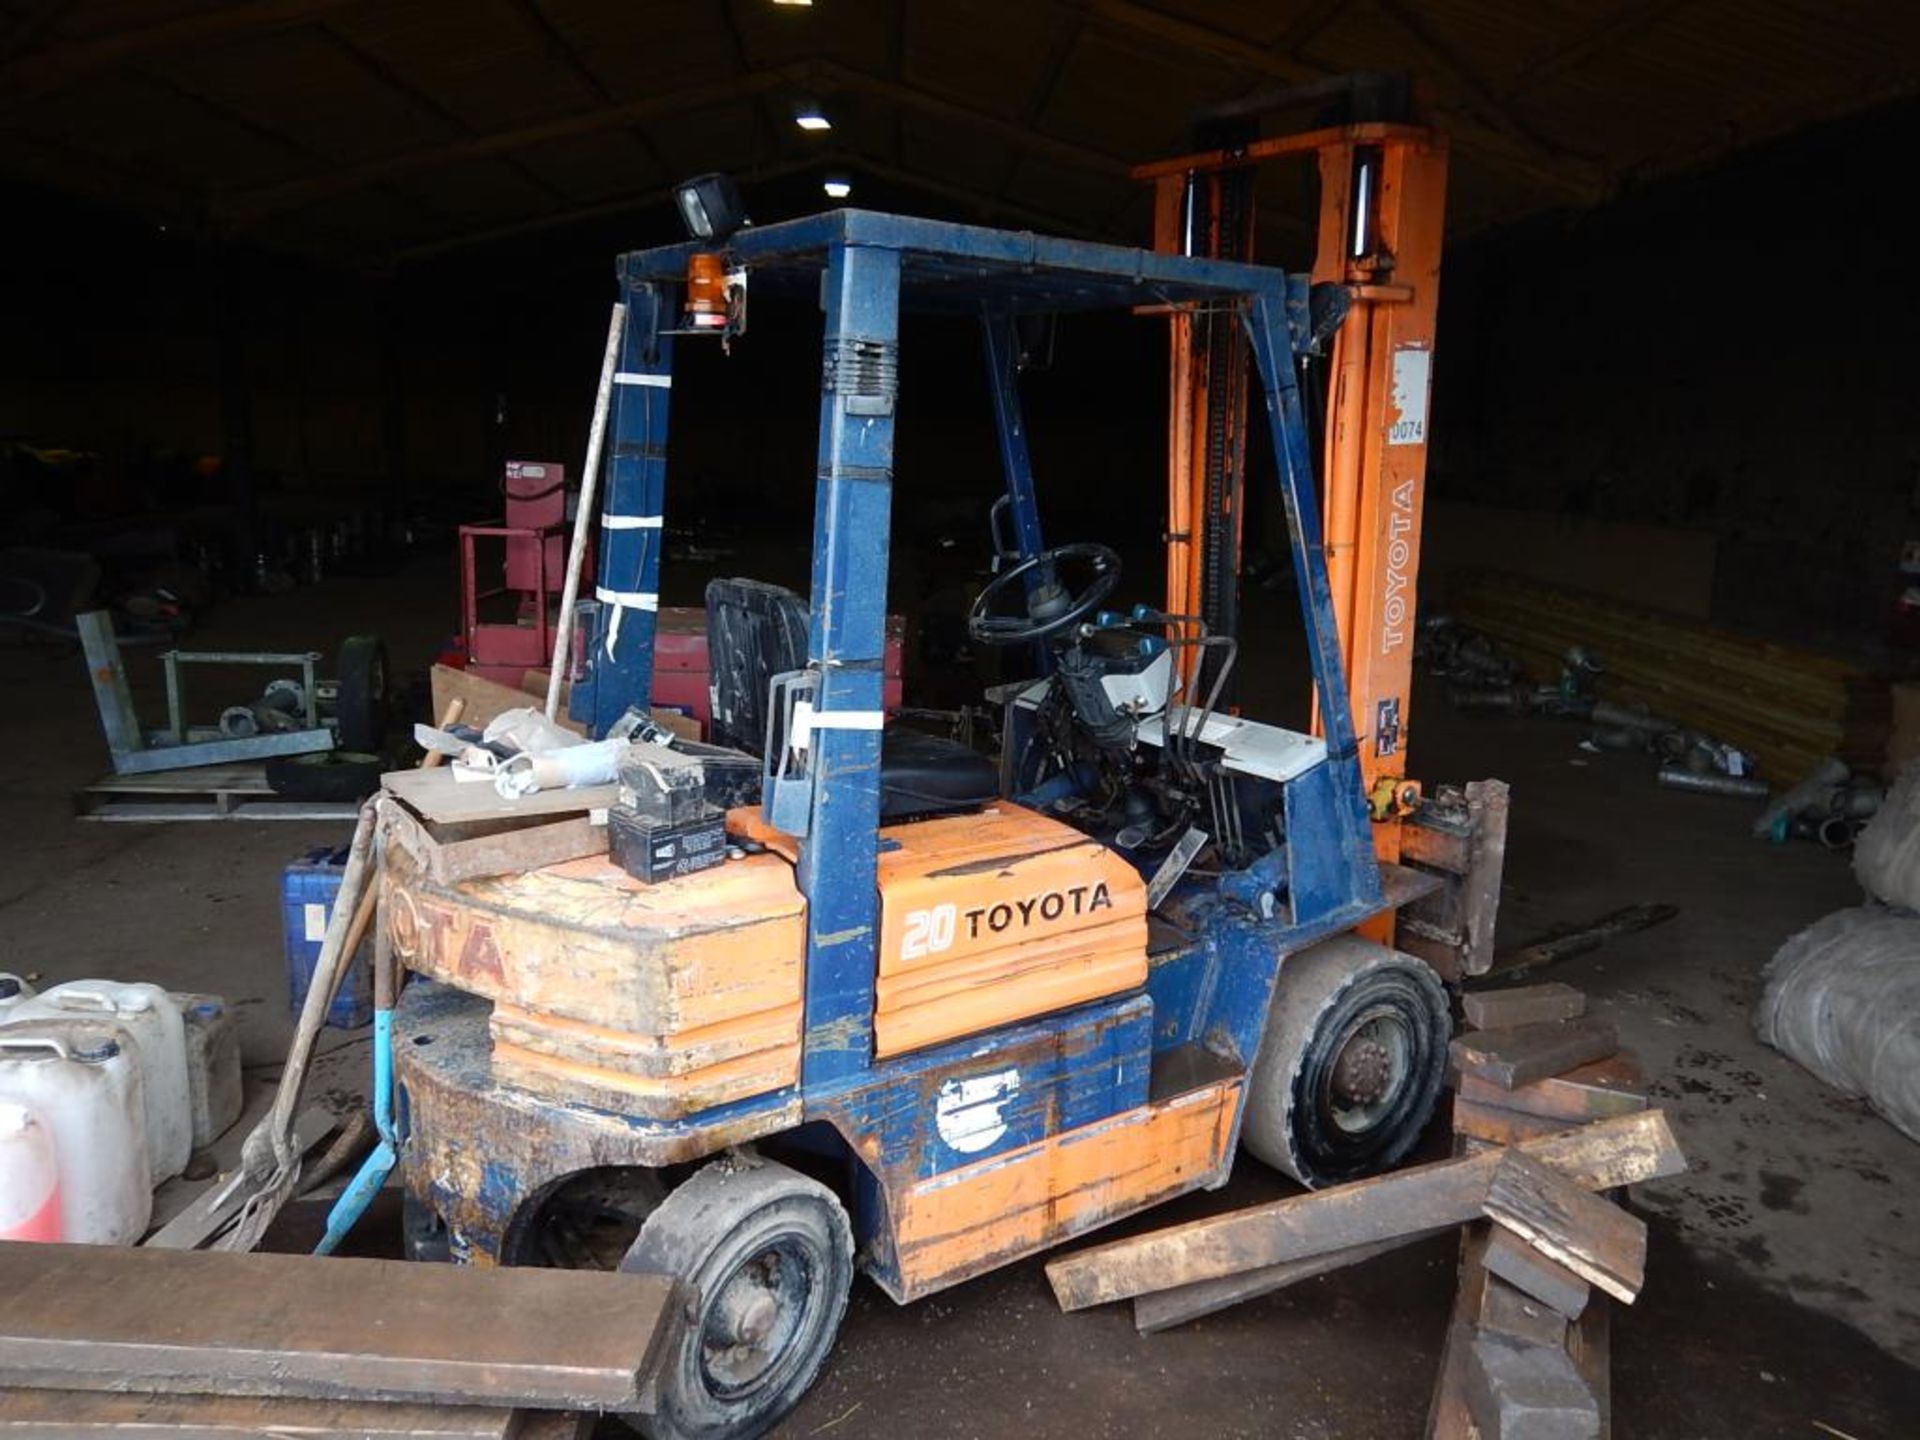 1988 Toyota 20 2stage fixed mast diesel forklift Serial No. 20640 Model No. 025FD20 Hours: 21,516